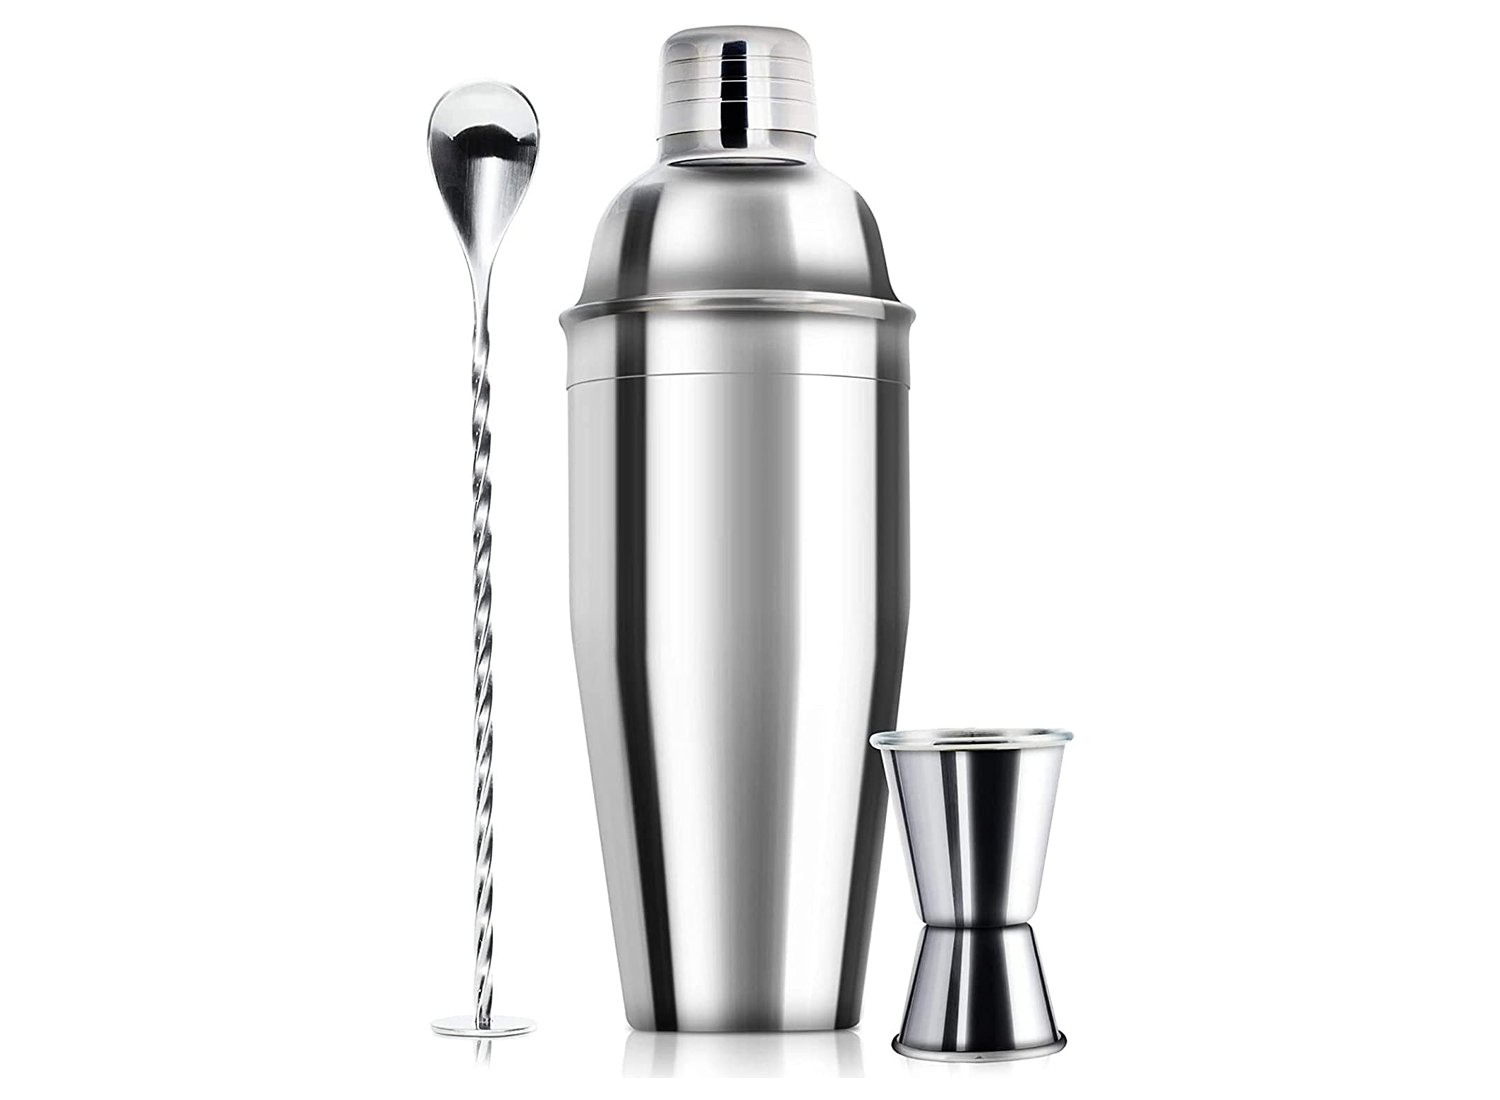 https://www.brit.co/reviews/wp-content/uploads/2023/11/WPHUAW-Cocktail-Shaker-Set-britco-channel-576-article-228417-review-1306210.jpg